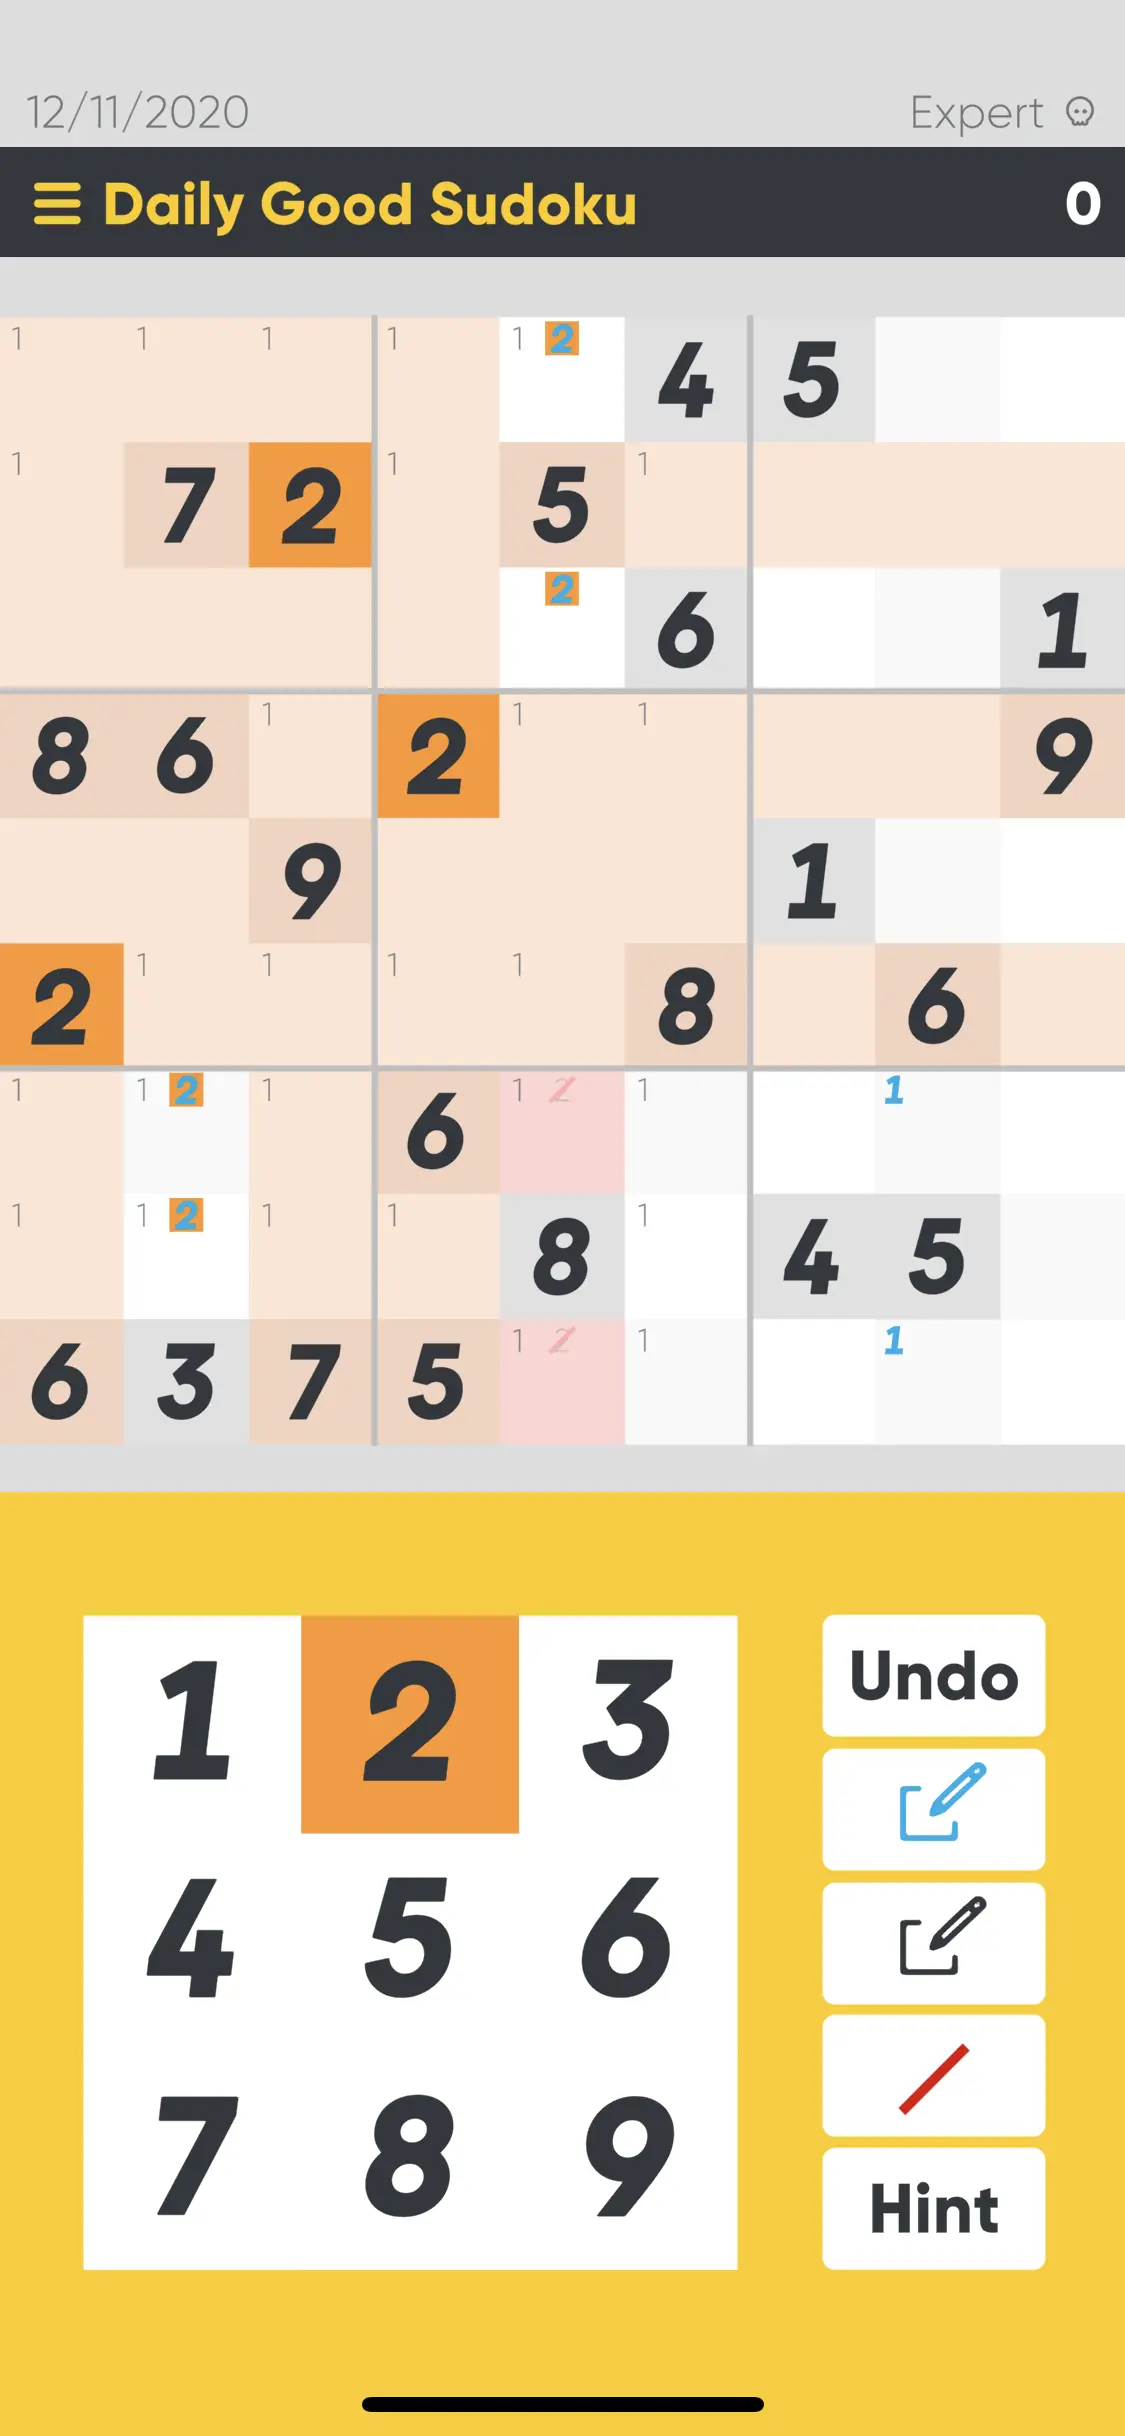 Good Sudoku board in yellow, with #2 selected, some are crossed out, some numbers are selected.